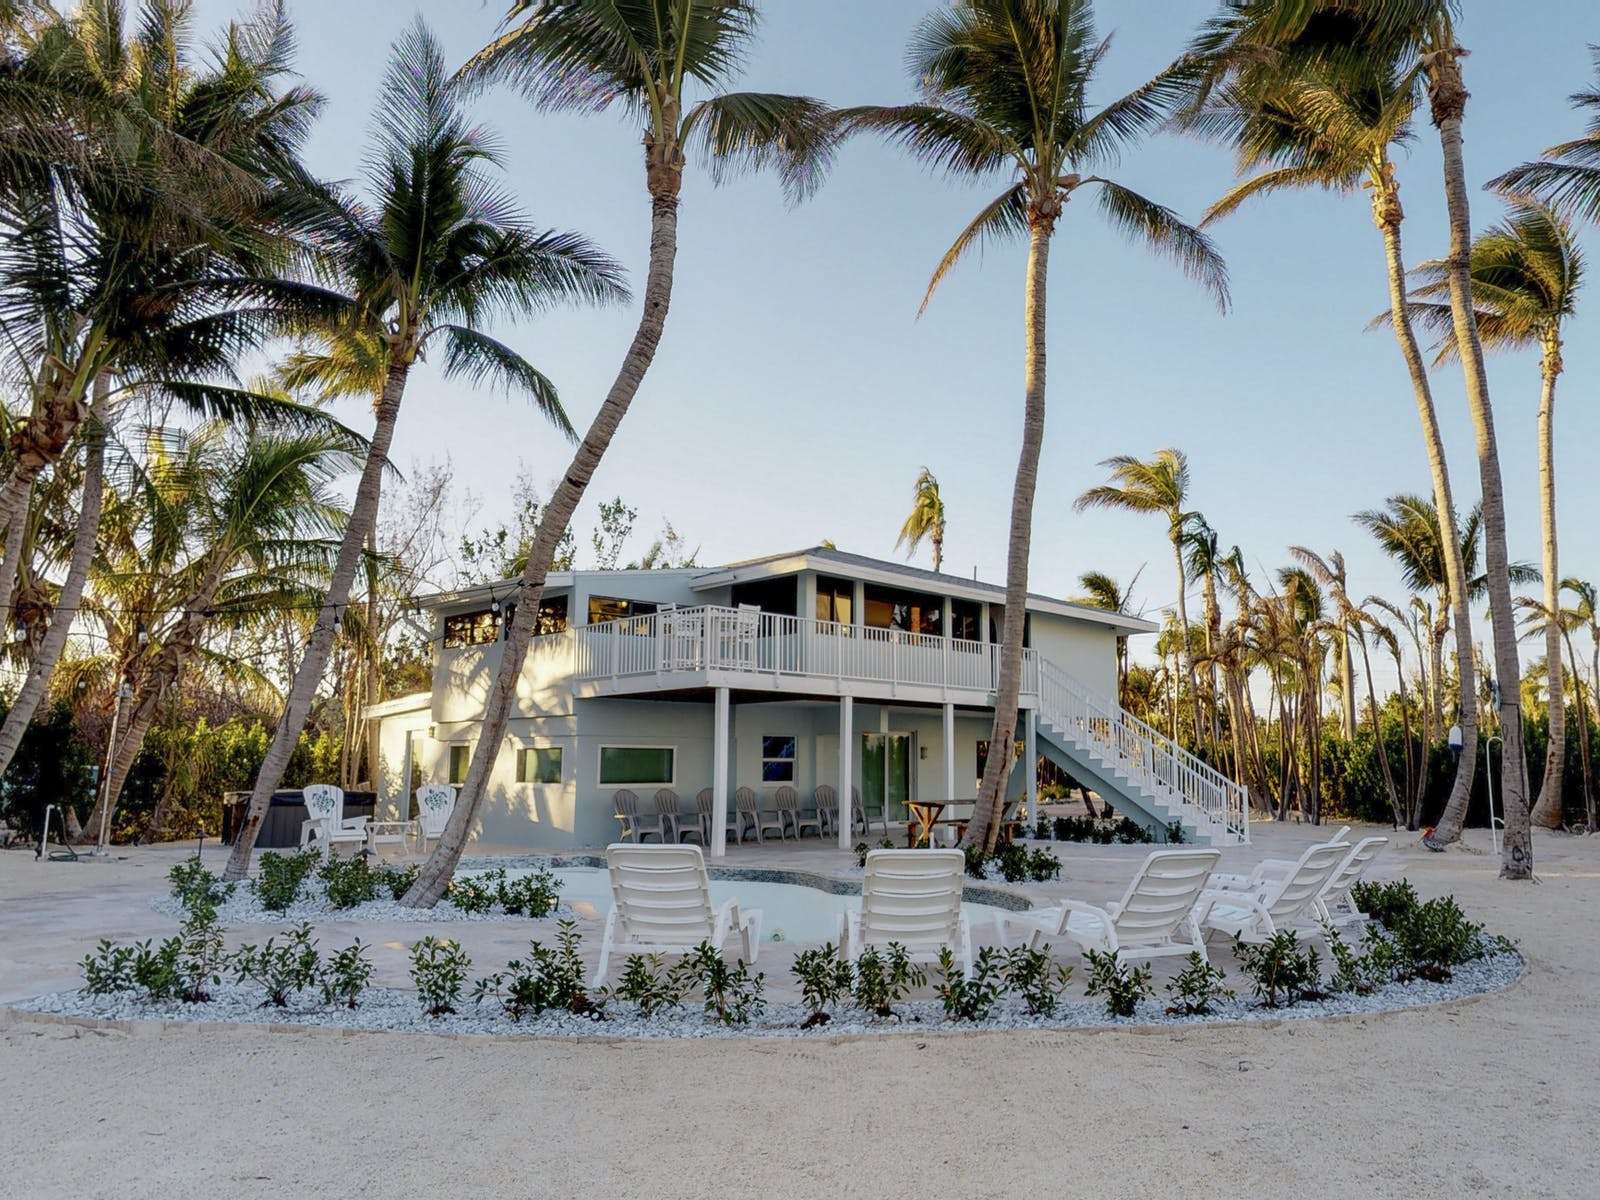 10 Best Places to Buy a Beach House in 2019